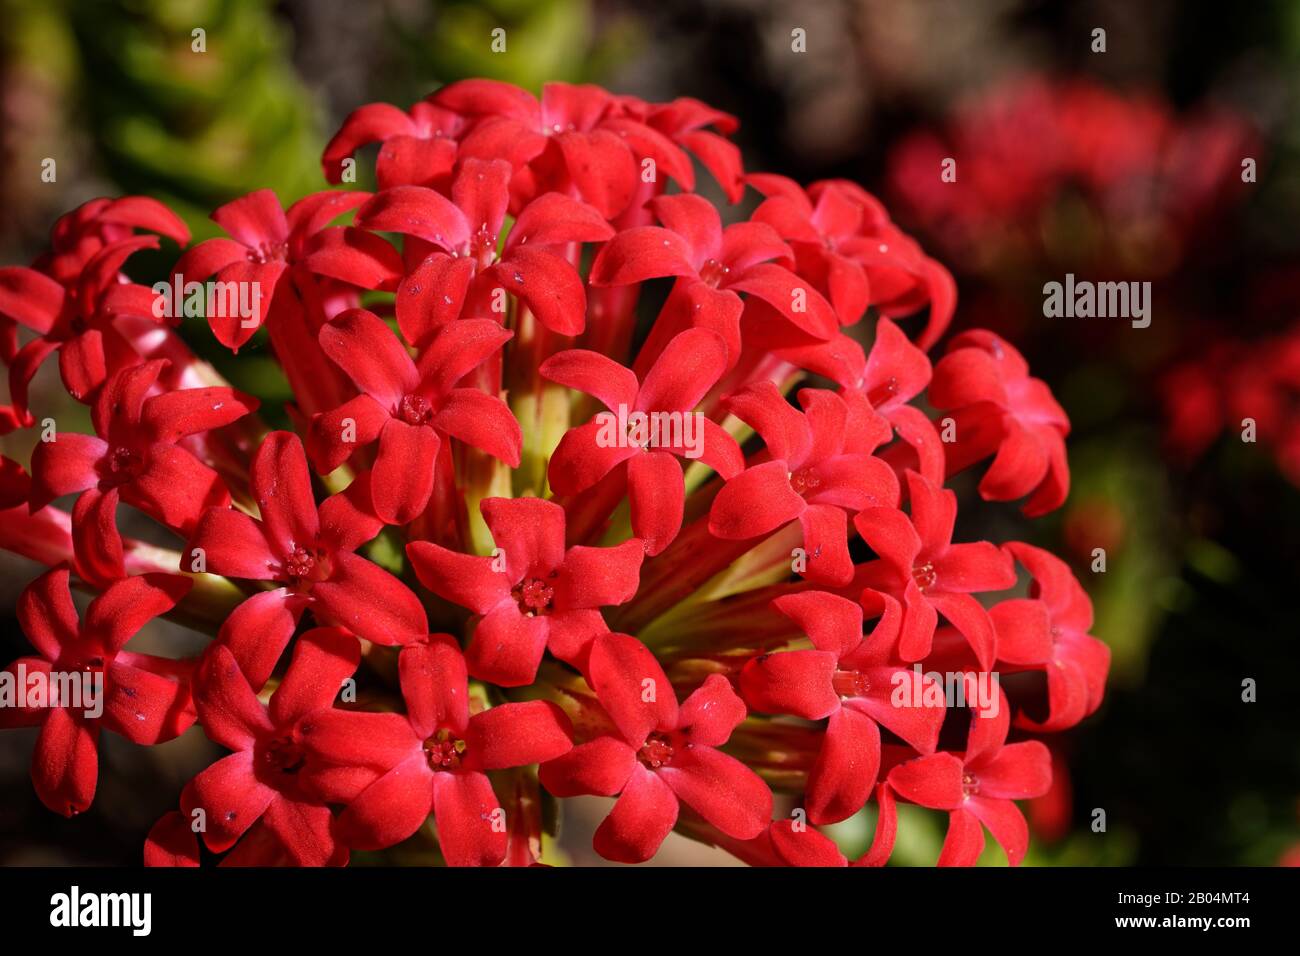 Red crassula is a succulent plant with flat heads of striking, bright scarlet flowers. Stock Photo